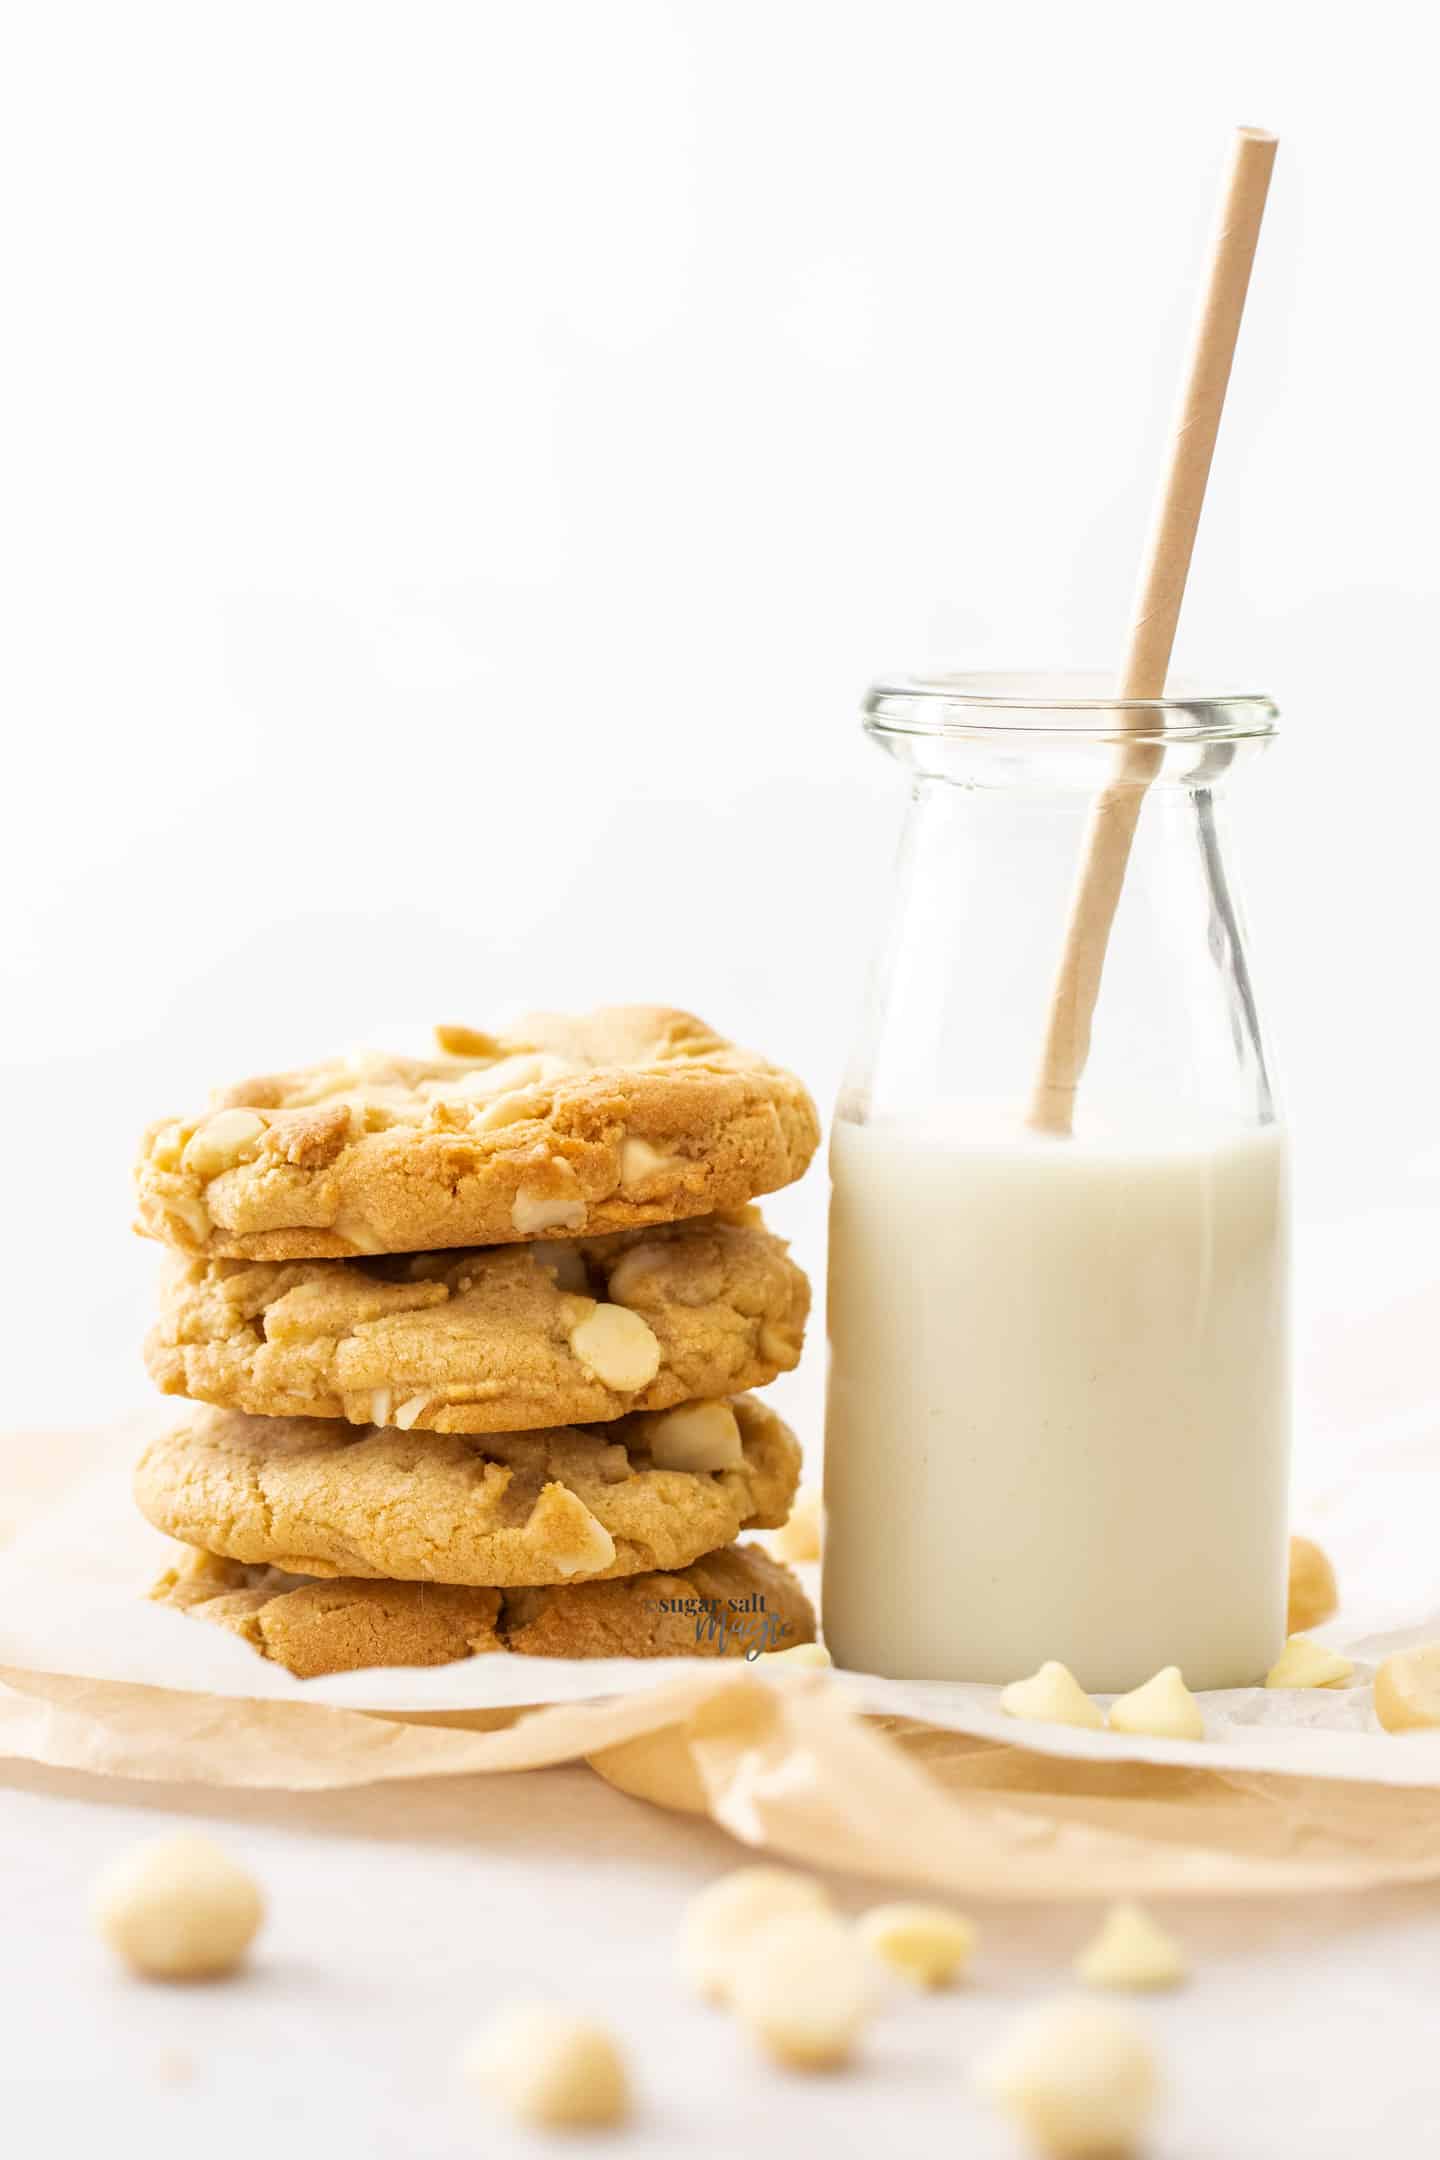 A stack of 4 cookies sitting up against a small bottle of milk.